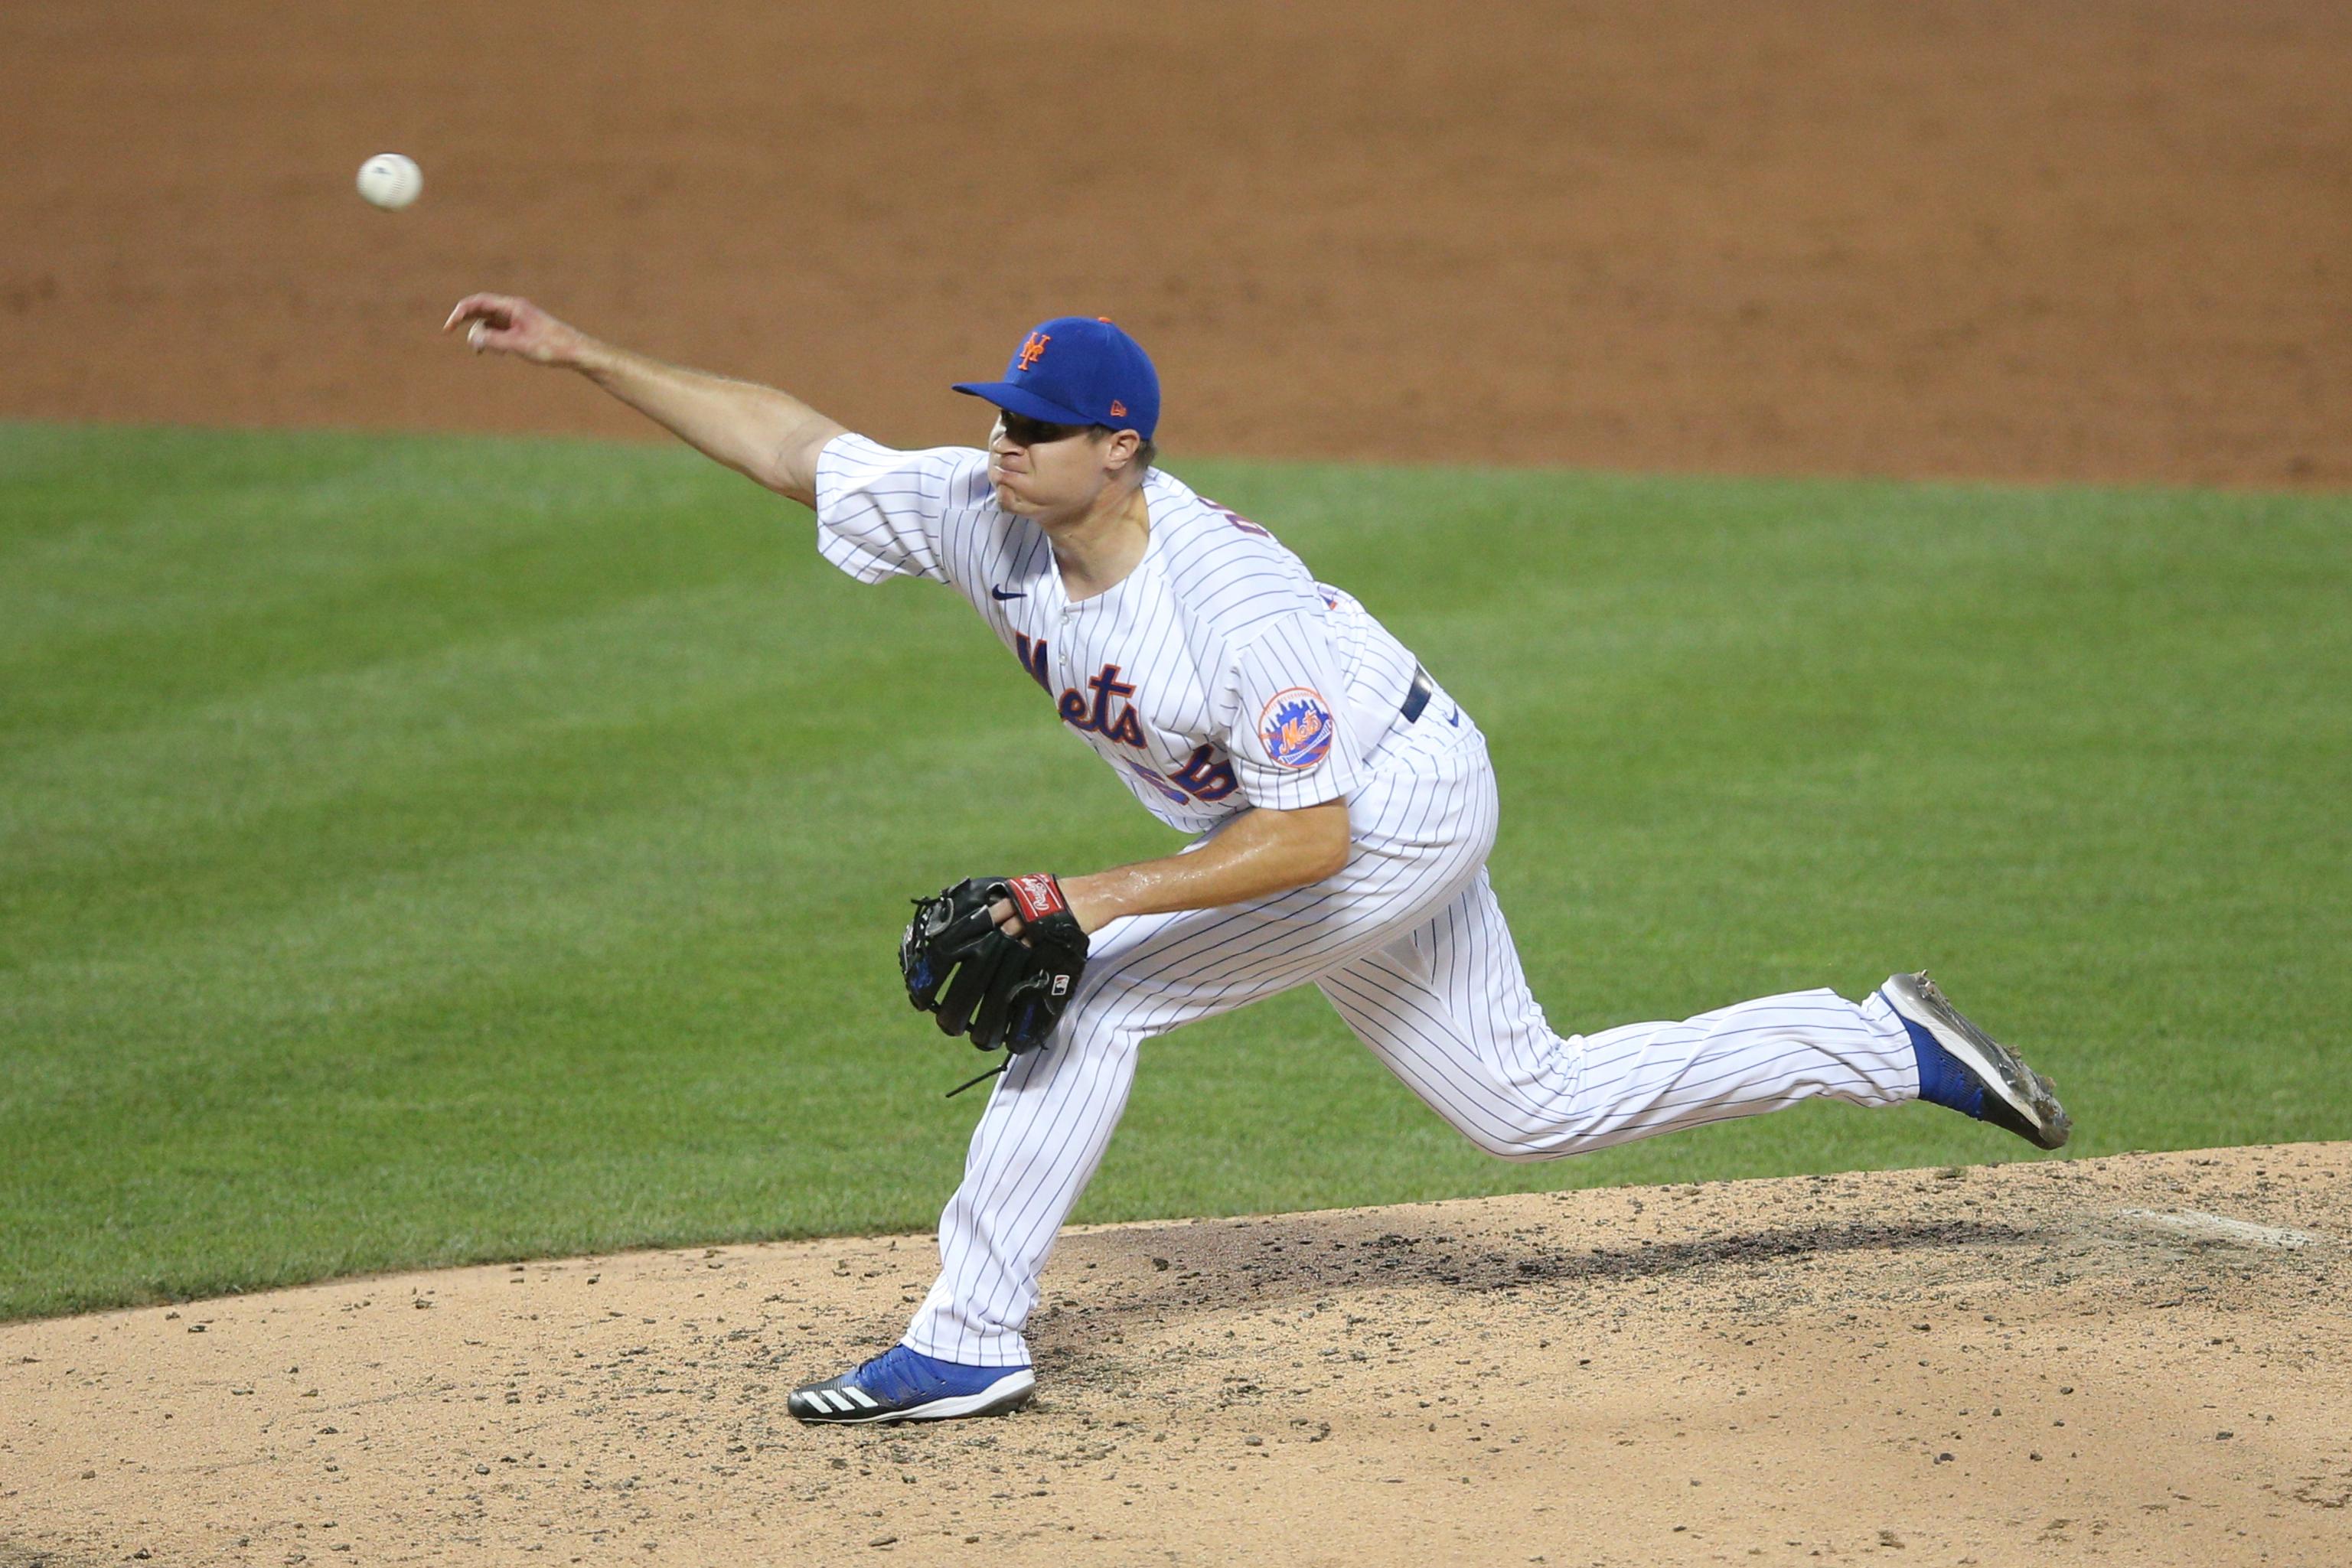 Jul 26, 2020; New York City, New York, USA; New York Mets starting pitcher Corey Oswalt (55) pitches against the Atlanta Braves during the third inning at Citi Field. Mandatory Credit: Brad Penner-USA TODAY Sports / Brad Penner-USA TODAY Sports